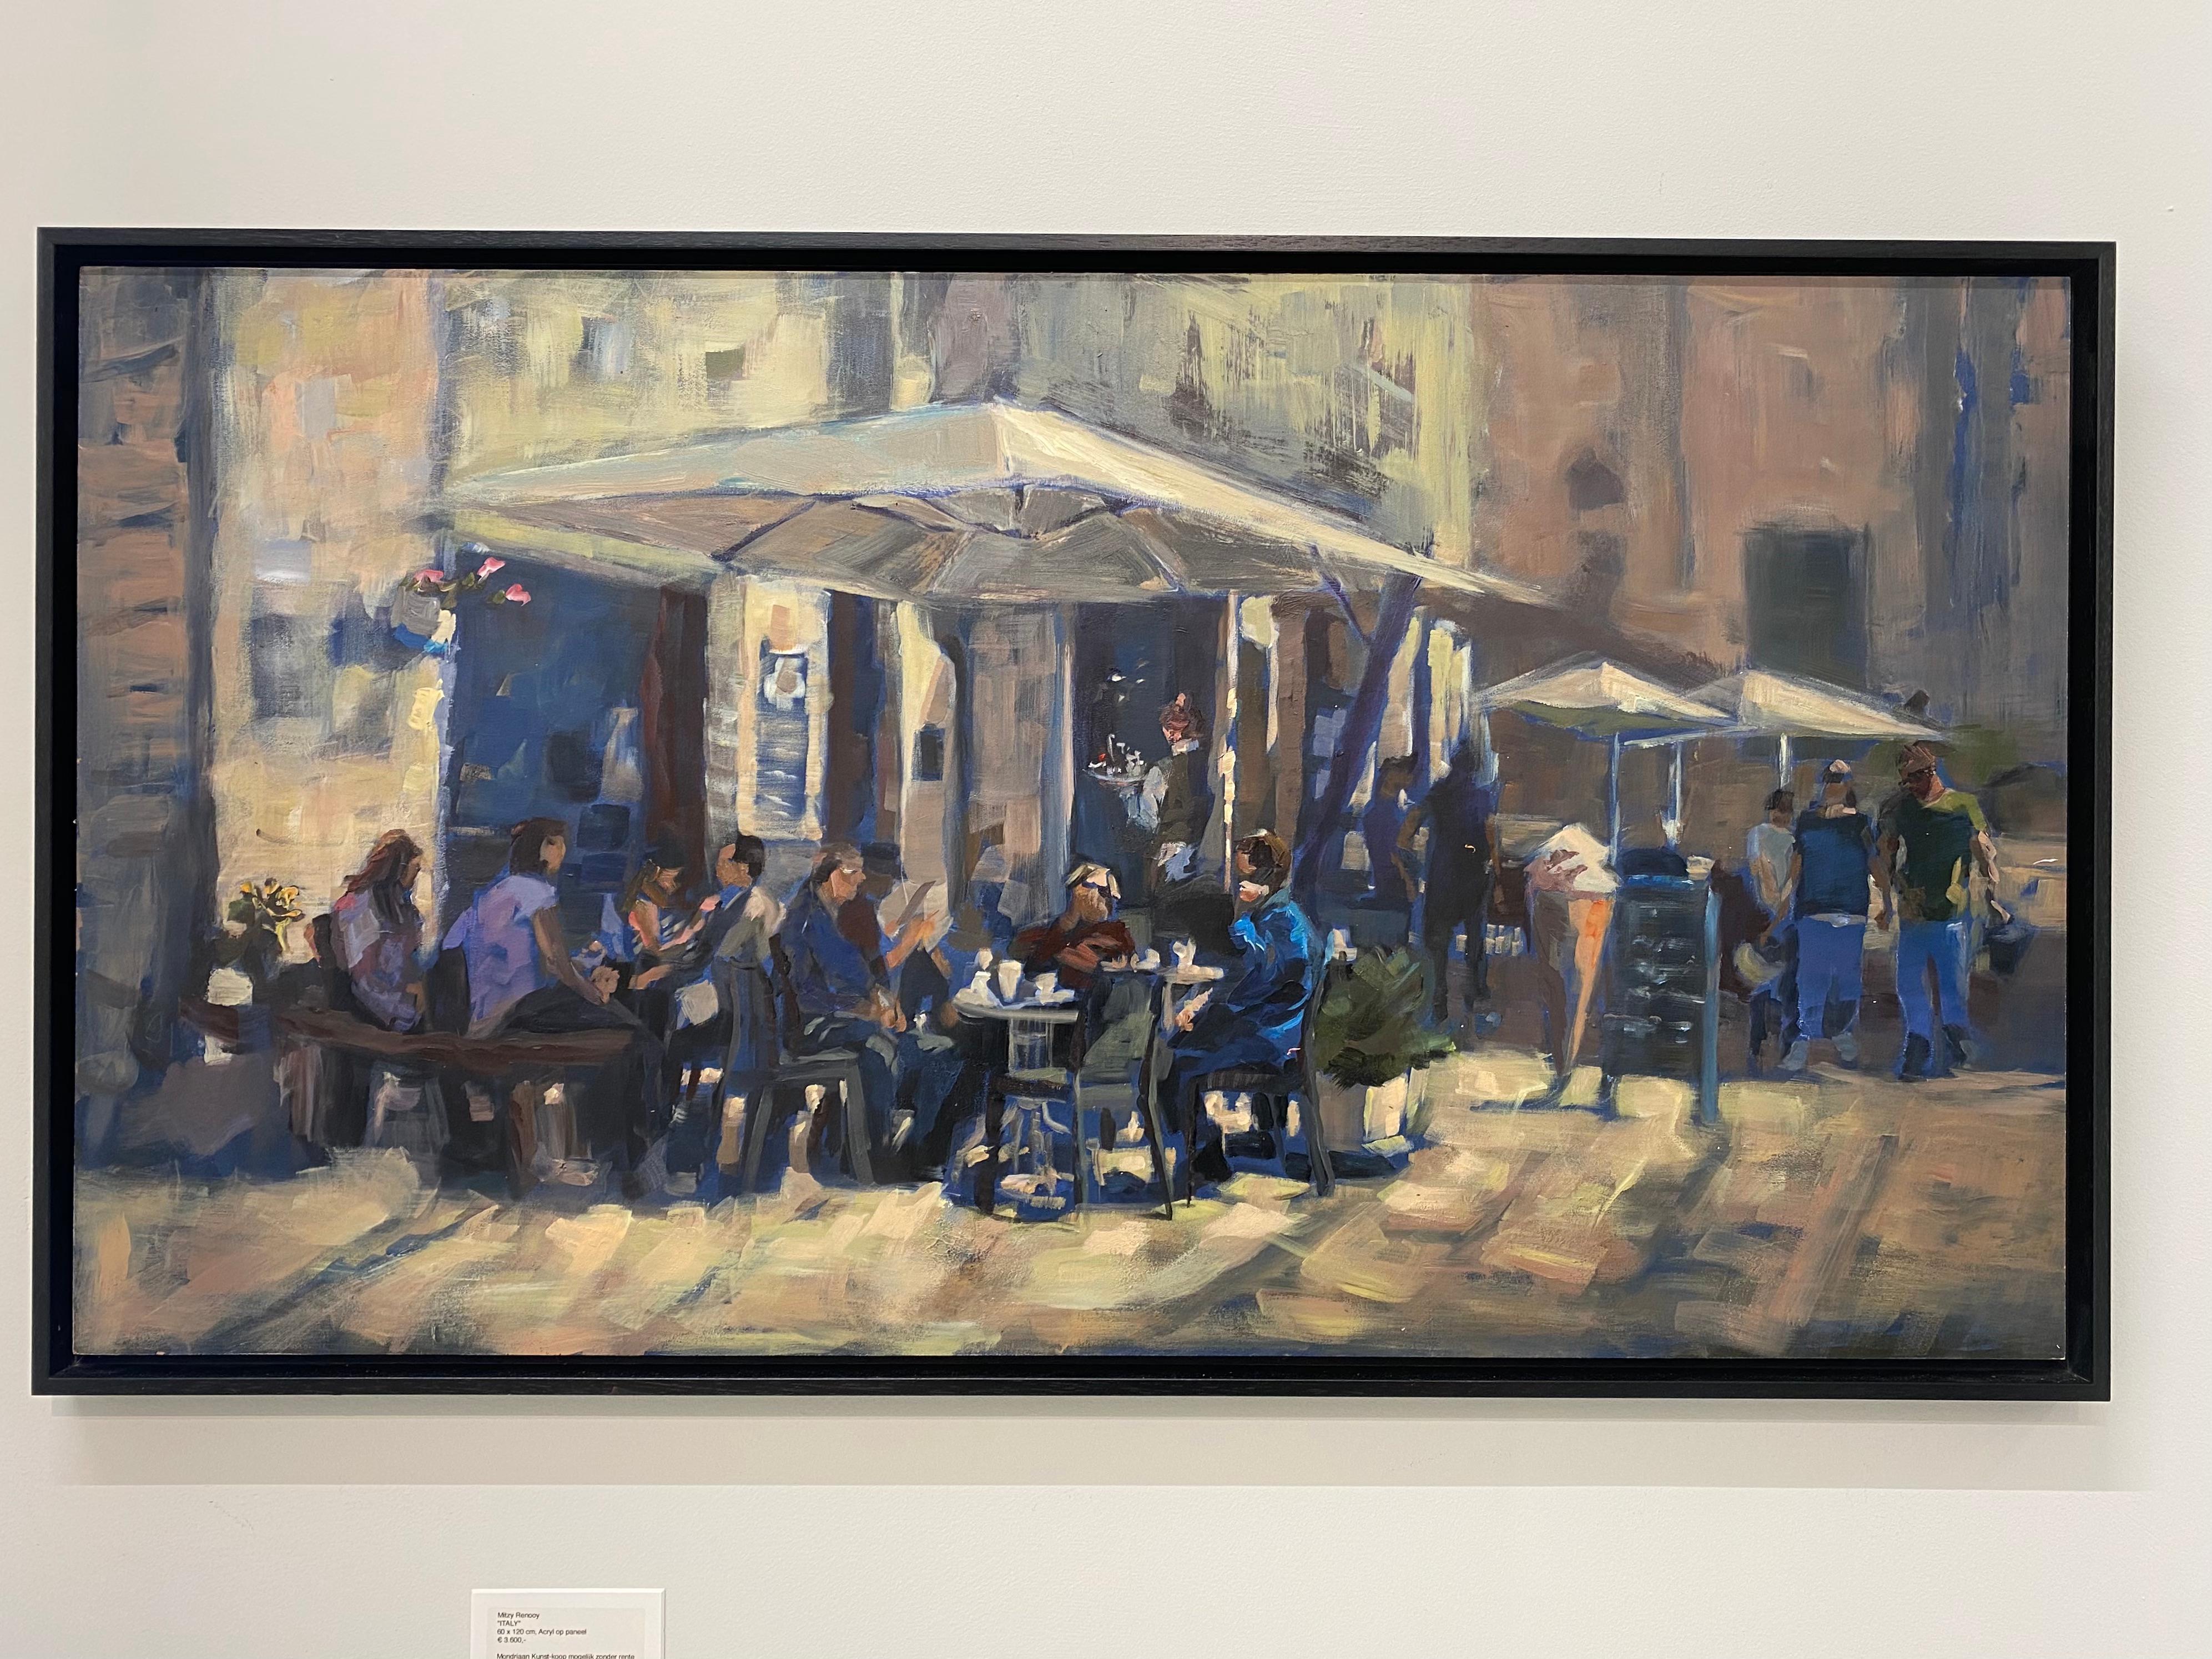 This spheric painting of a sunny terras in  Italy is made by Dutch artist Mitzy Renooy.

Her well-performed yet loose touch allows light on the places that matter. With this she shows the essence of the work without being compelling. During the